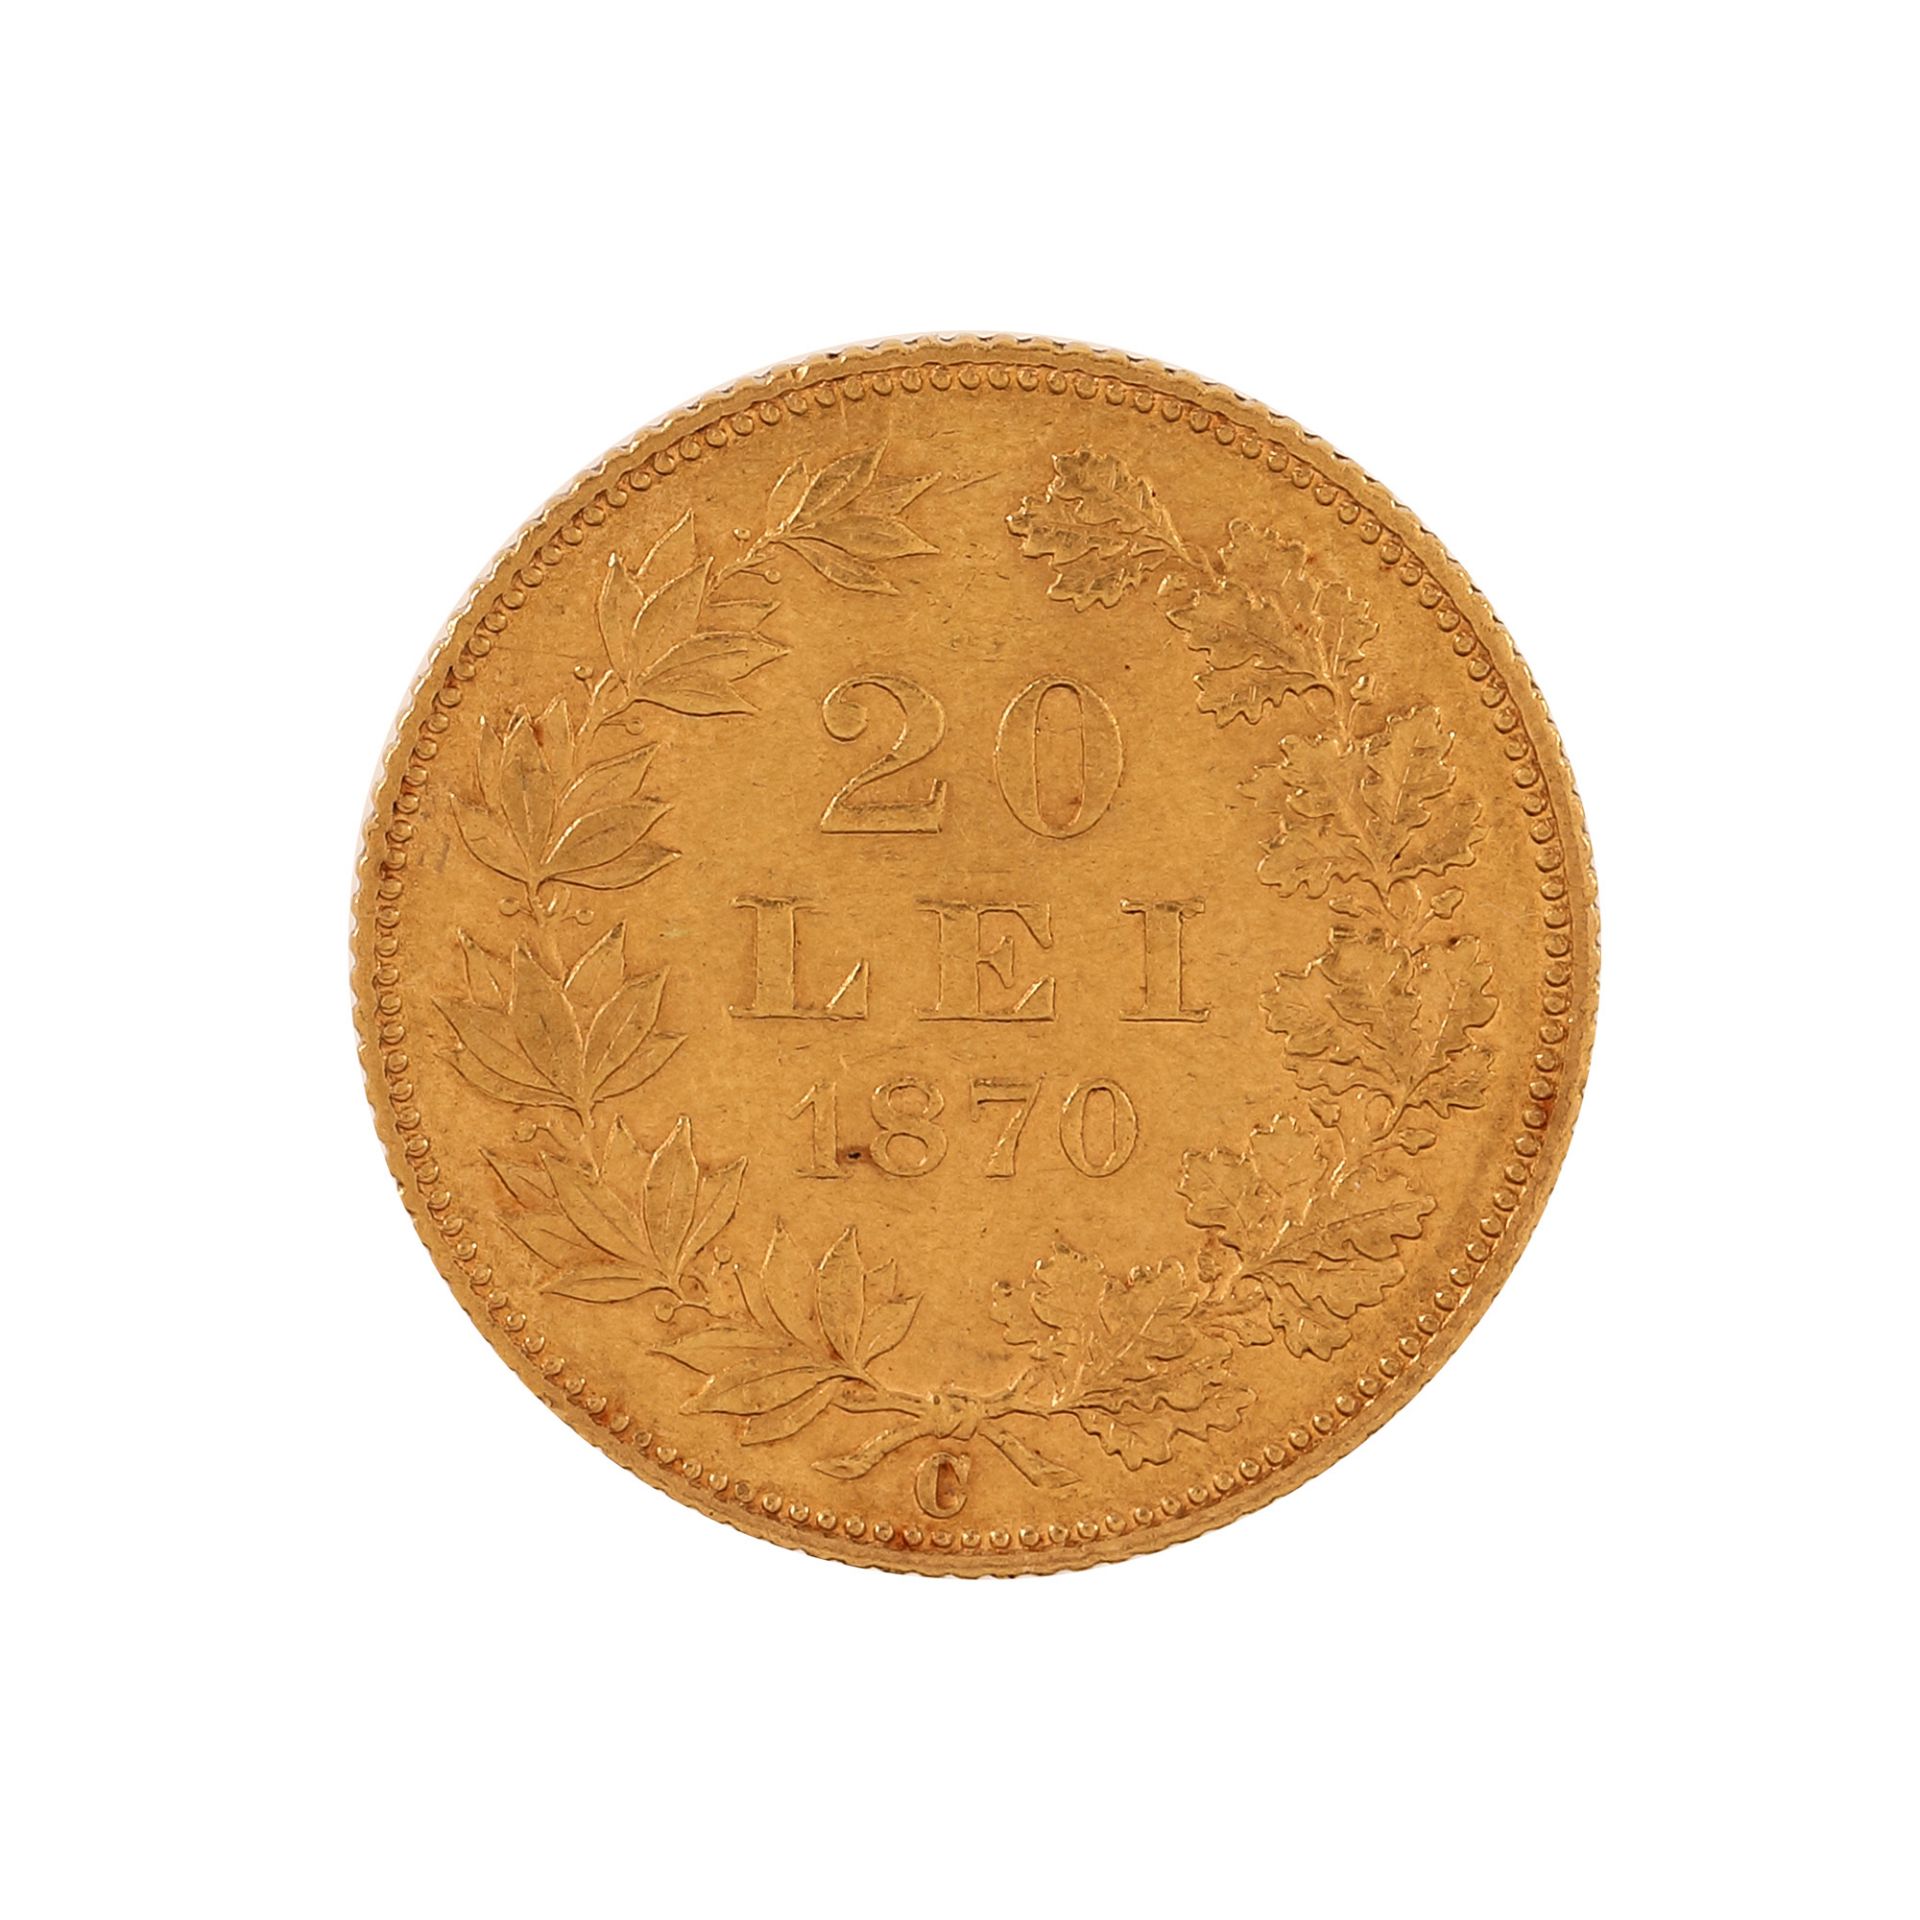 20 Lei 1870 coin, gold - Image 2 of 2